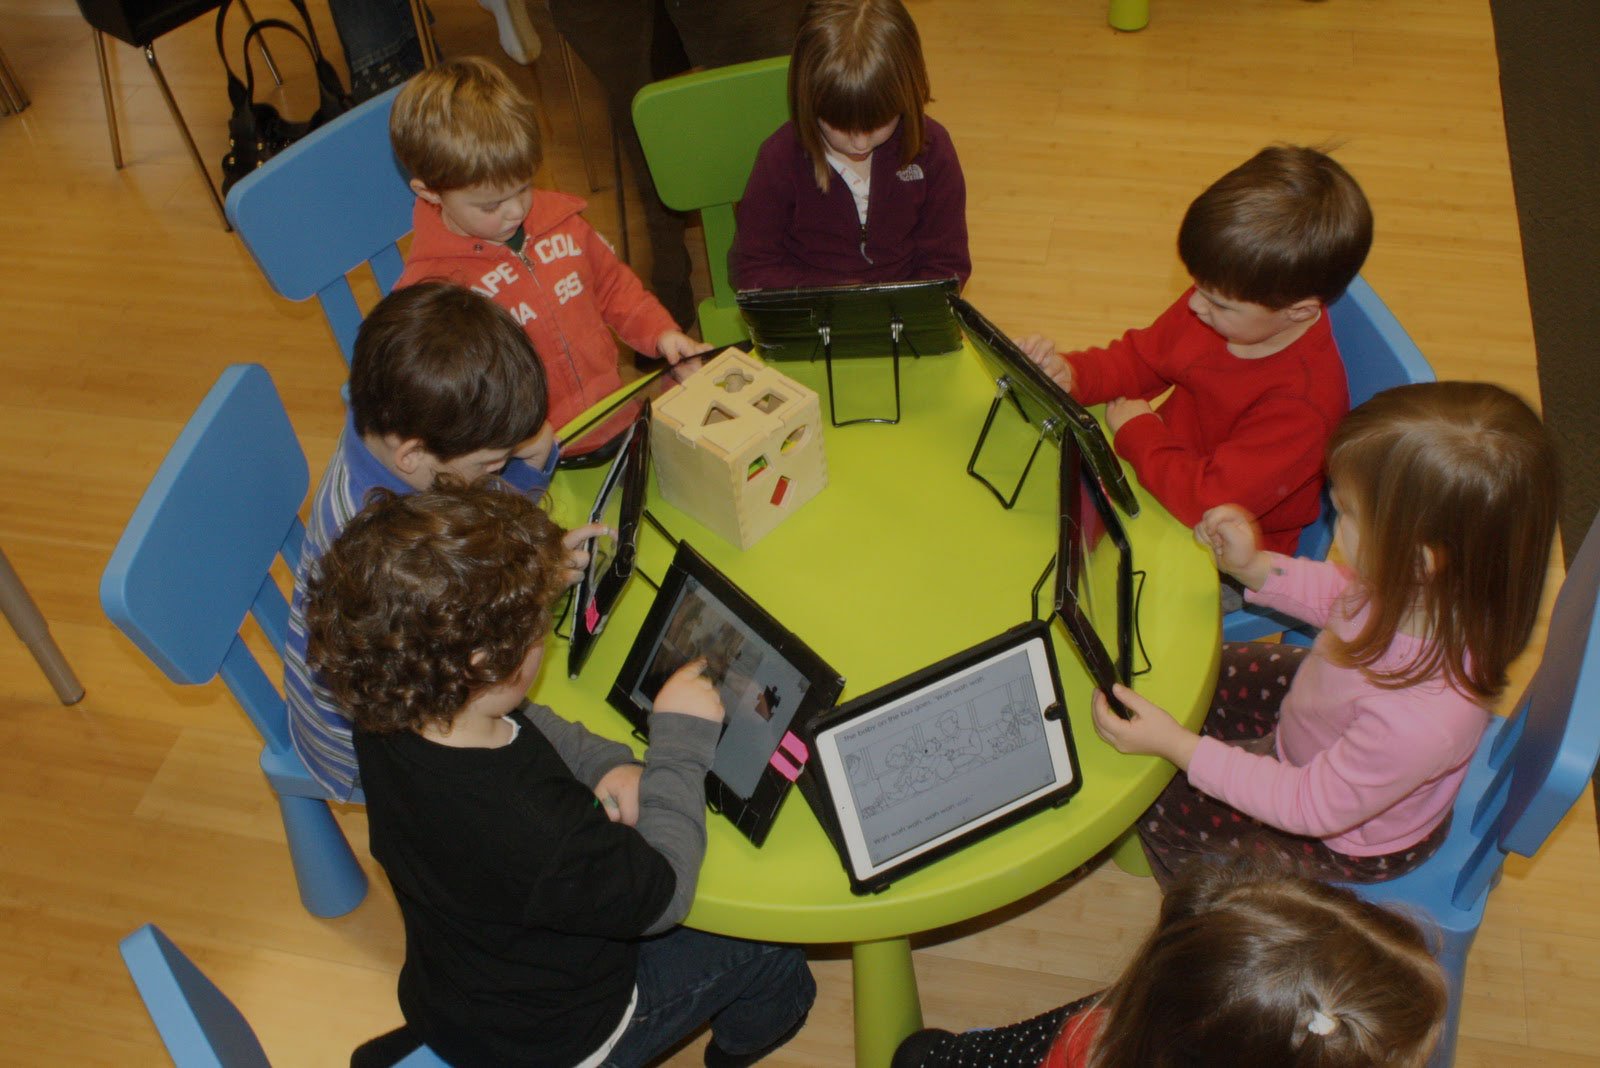 Students sitting at table in their classroom using tablets for learning